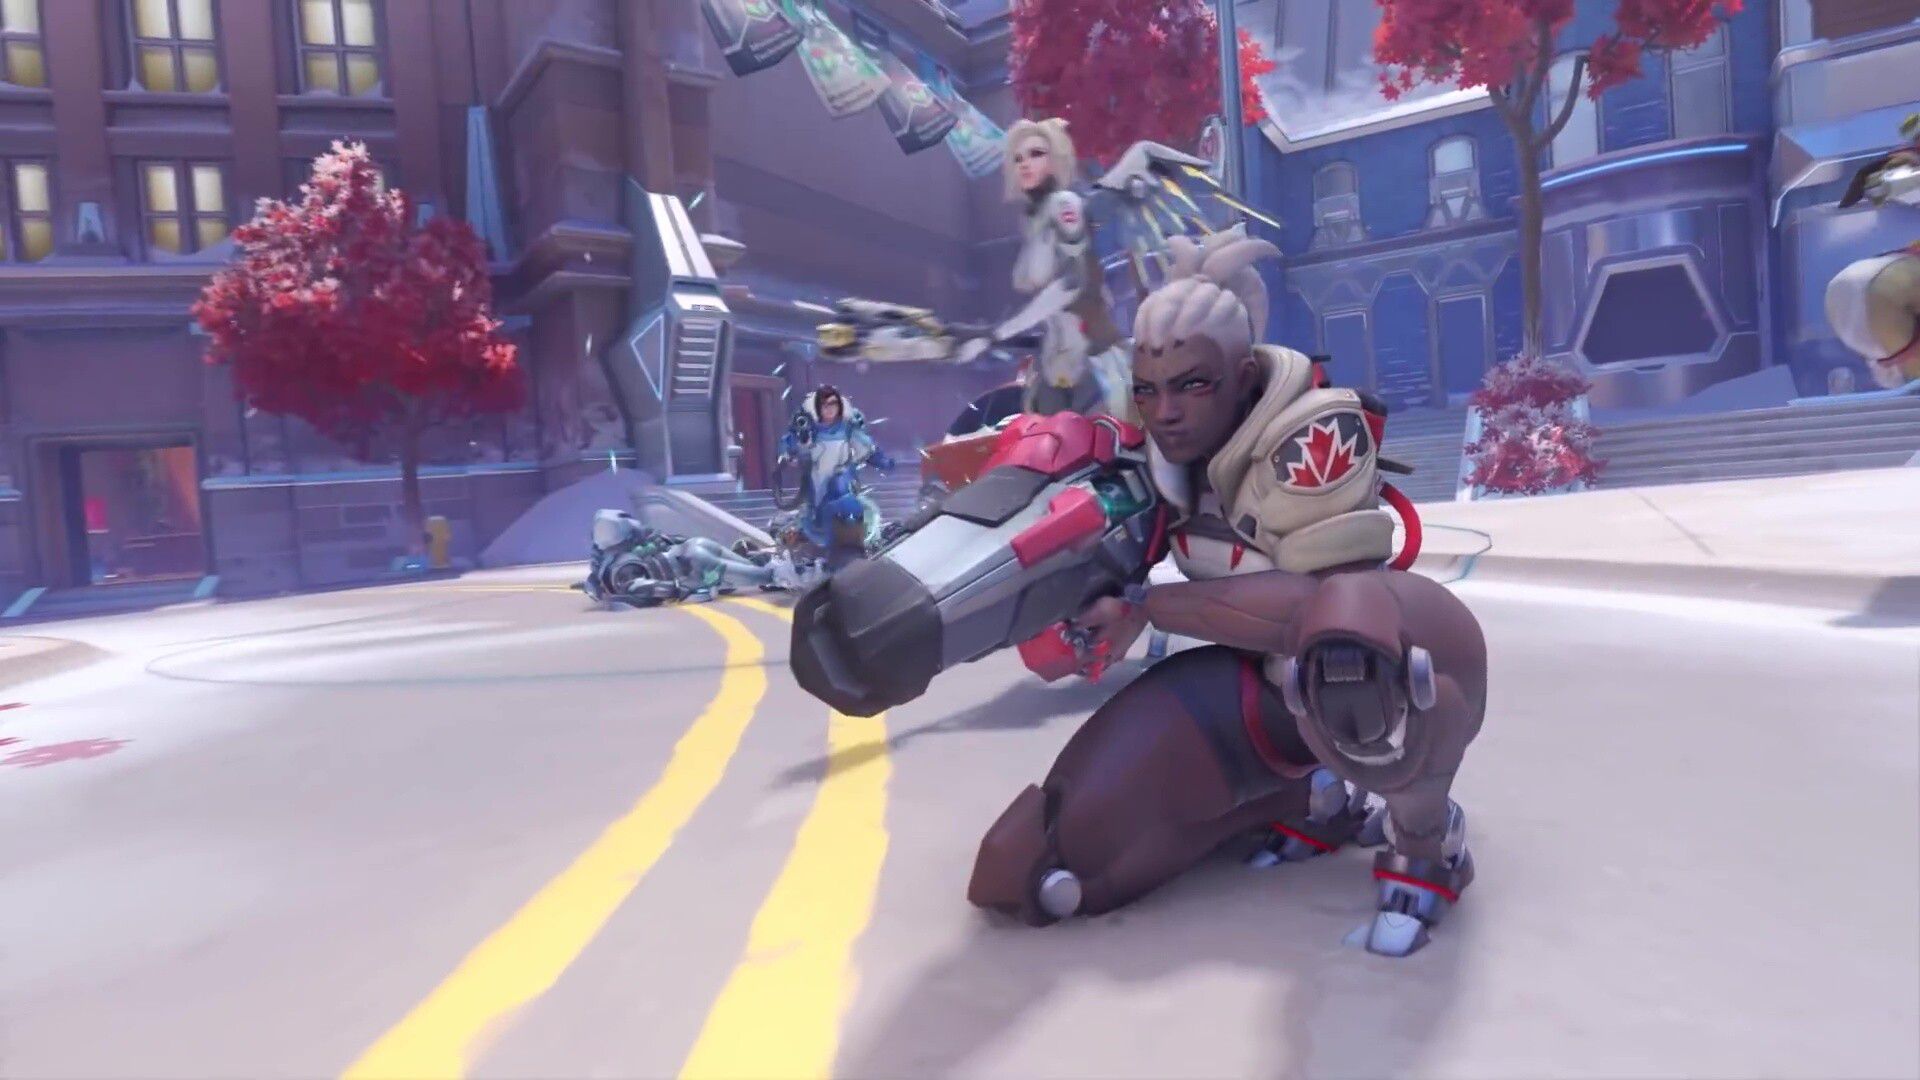 "Sojoan", a new character with a powerful rocket-equipped thigh with a whip whip of the Overwatch 2 machine 21